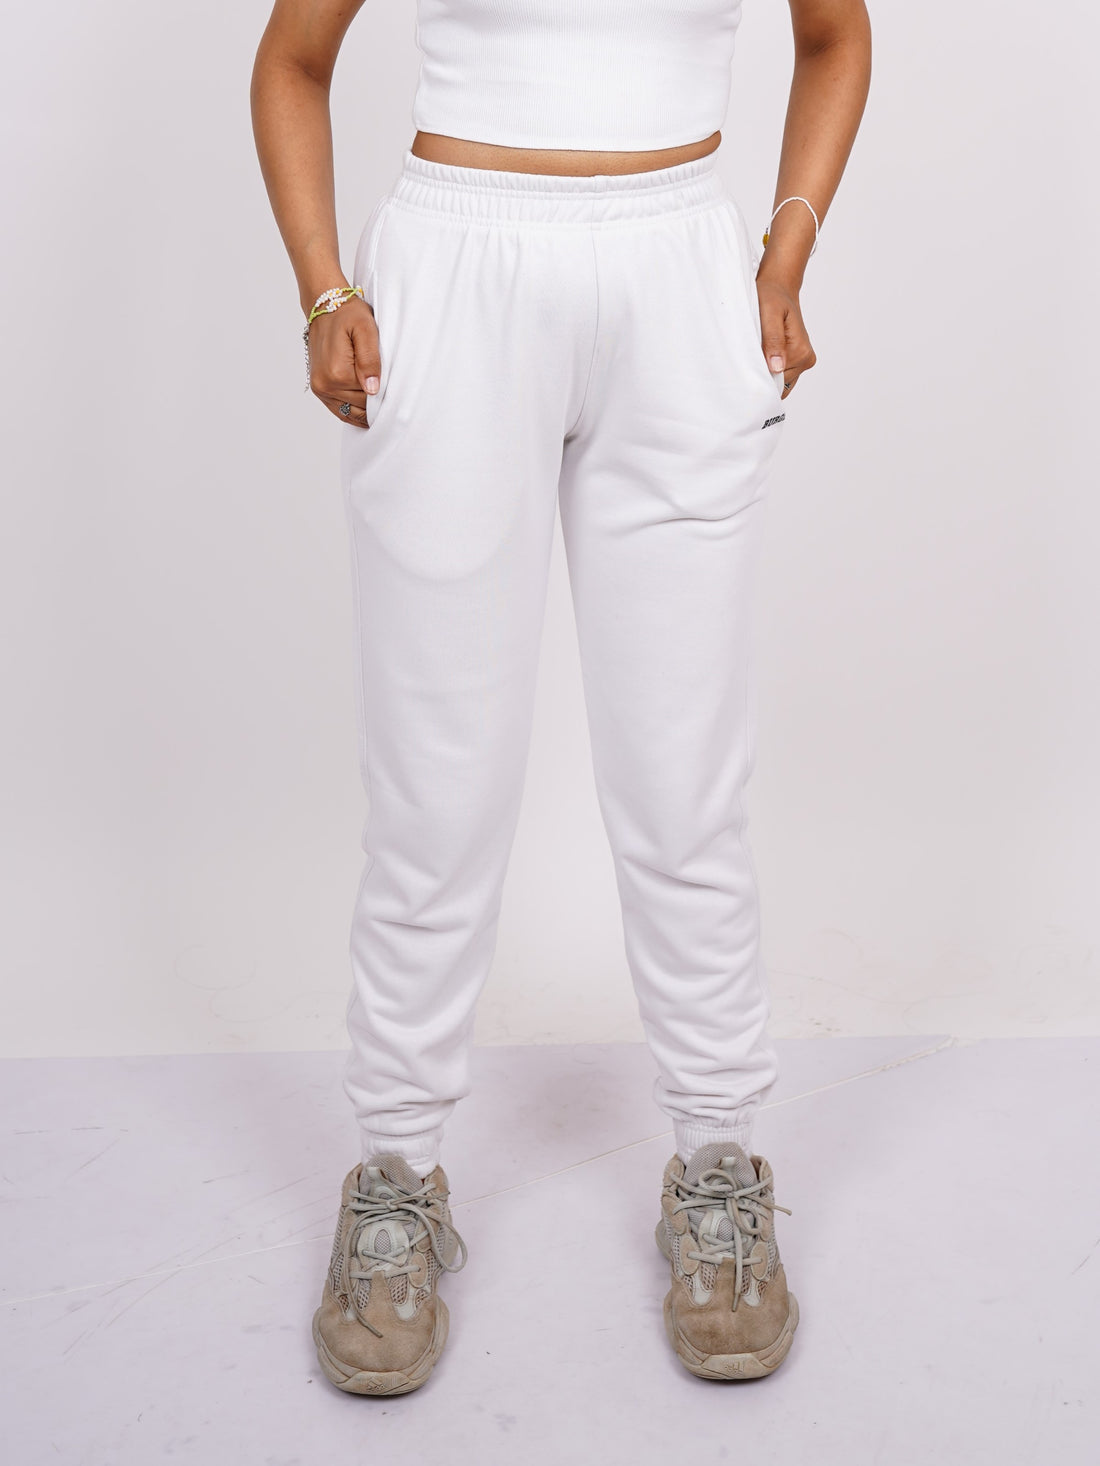 Gathered Jogger/Tracks (White) For Men And Women